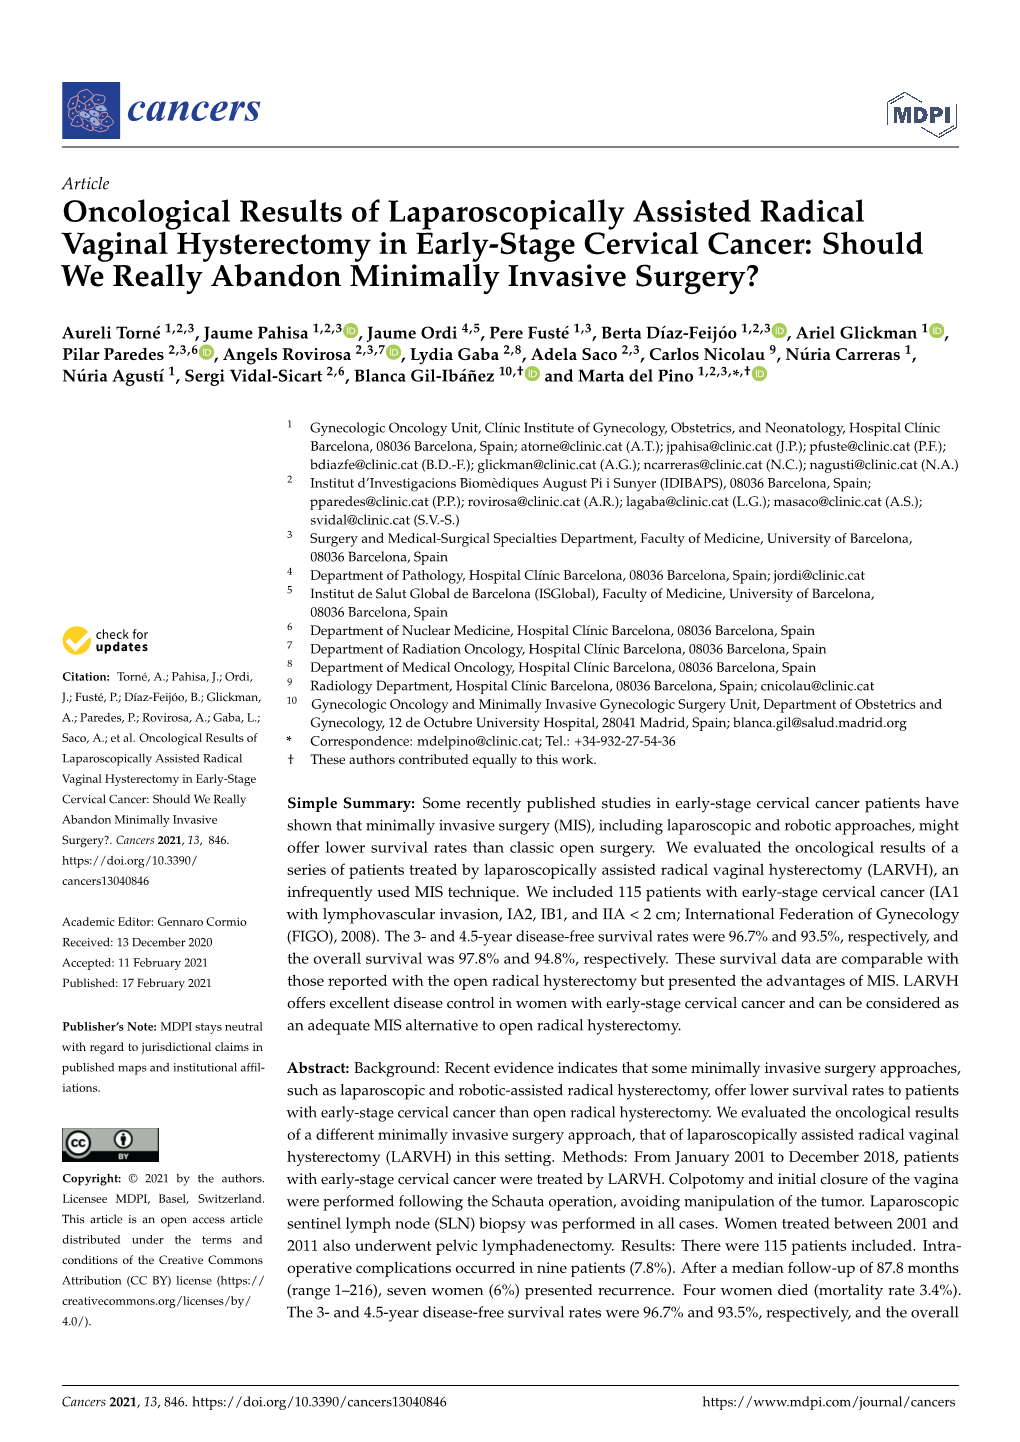 Oncological Results of Laparoscopically Assisted Radical Vaginal Hysterectomy in Early-Stage Cervical Cancer: Should We Really Abandon Minimally Invasive Surgery?